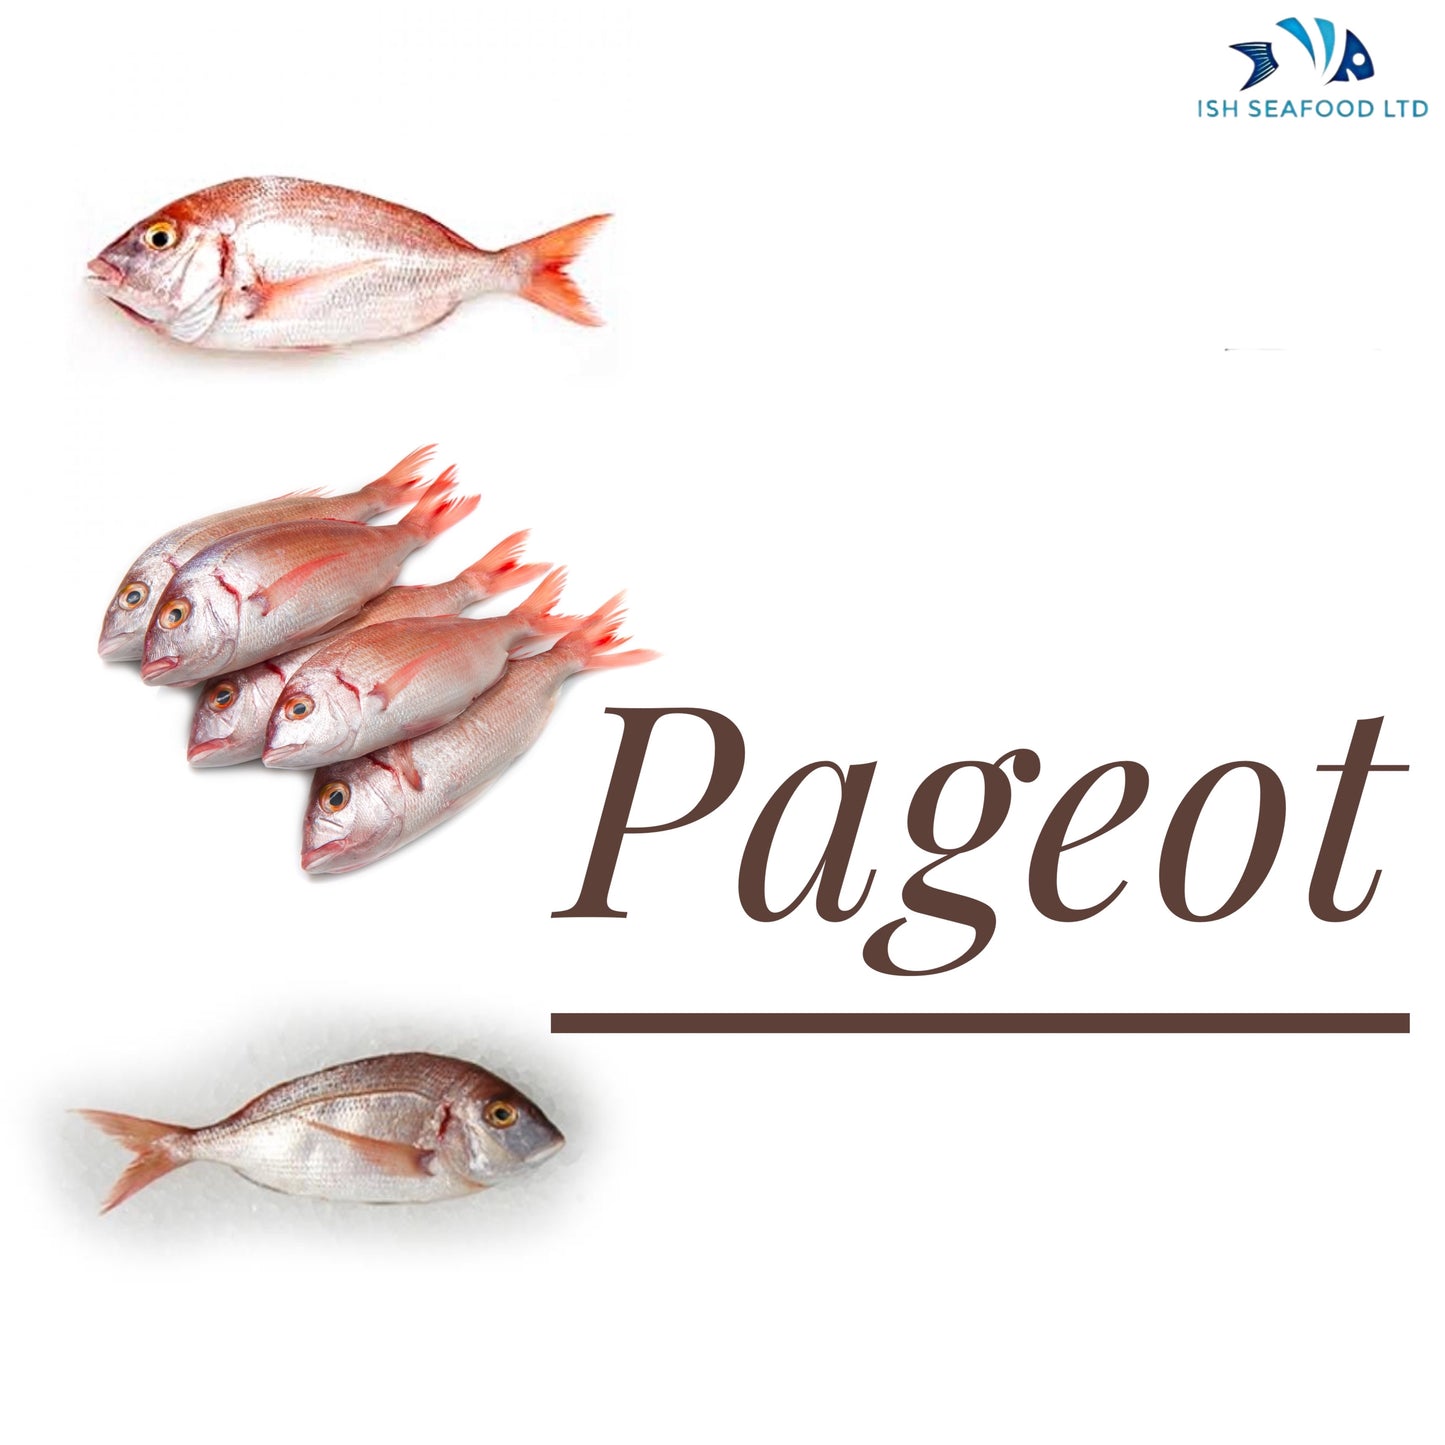 Pageot